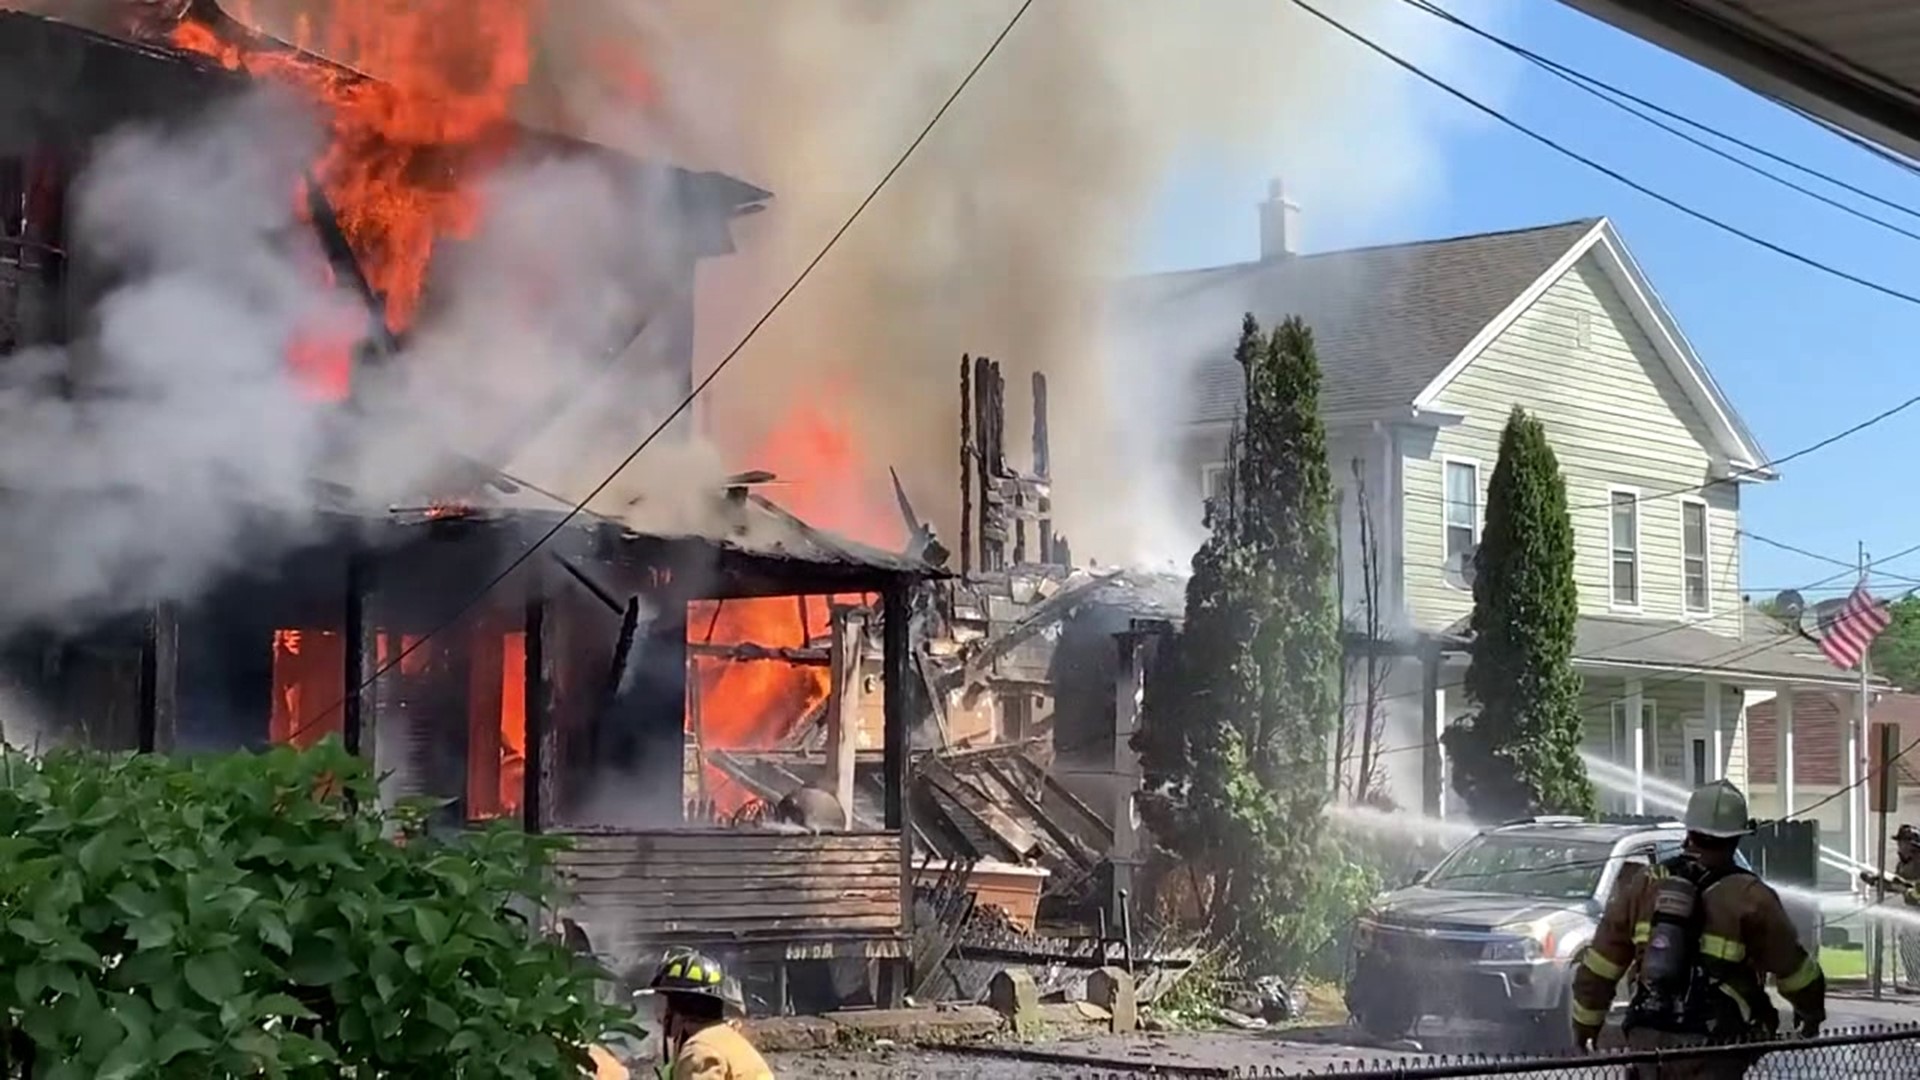 A massive fire tore through several homes in Plymouth Saturday morning leaving one person dead.